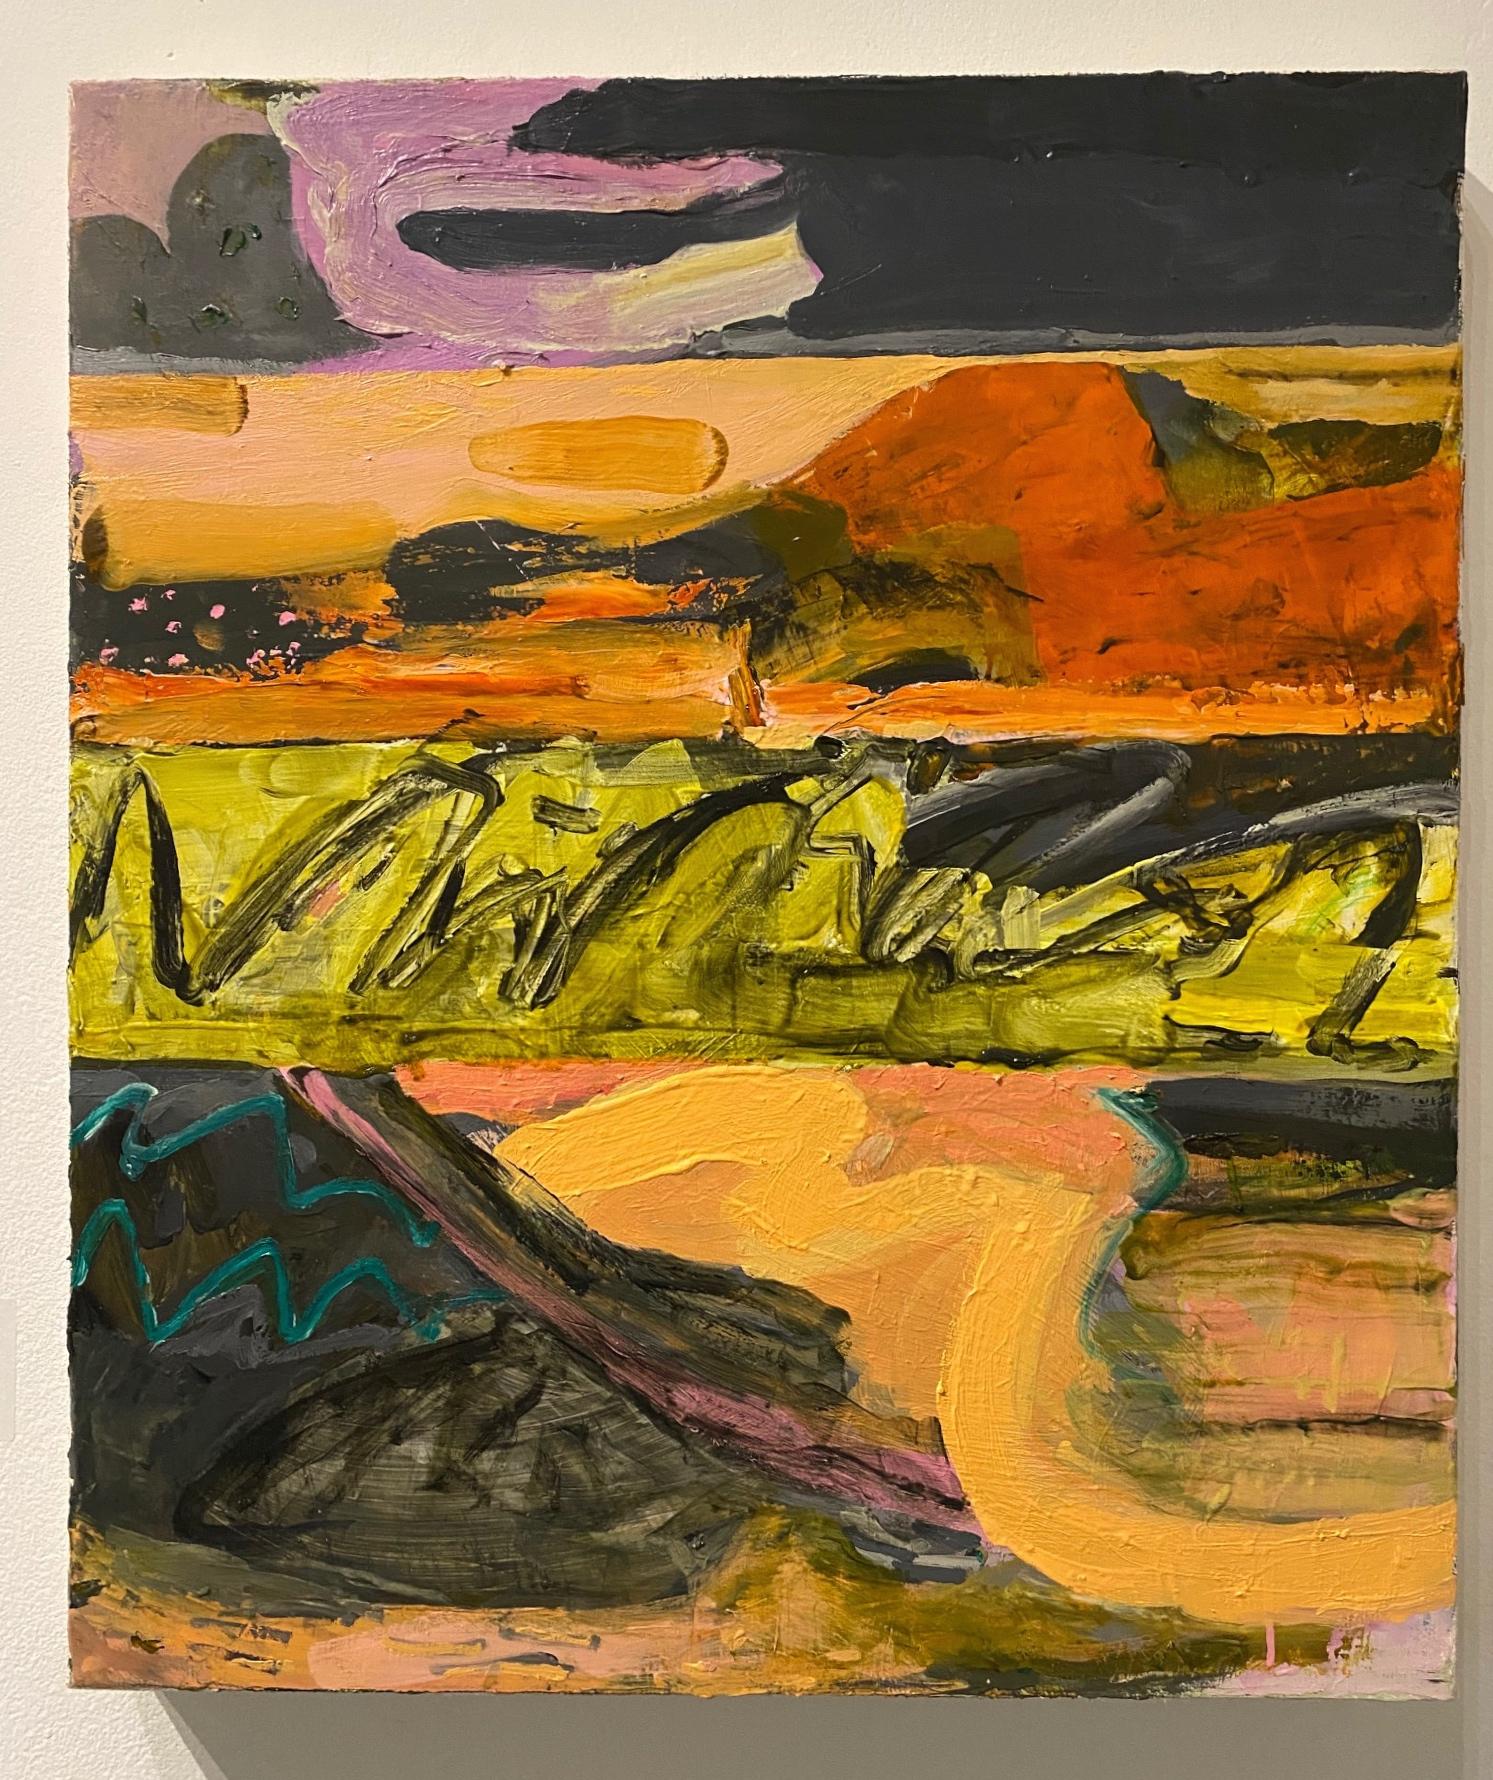 Alfredo Gisholt's understanding of composition shines through in this abstract landscape in oil on canvas. Adhering to principles of design, the visual language employed is enough to convey a sense of landscape without giving too much away - leaving